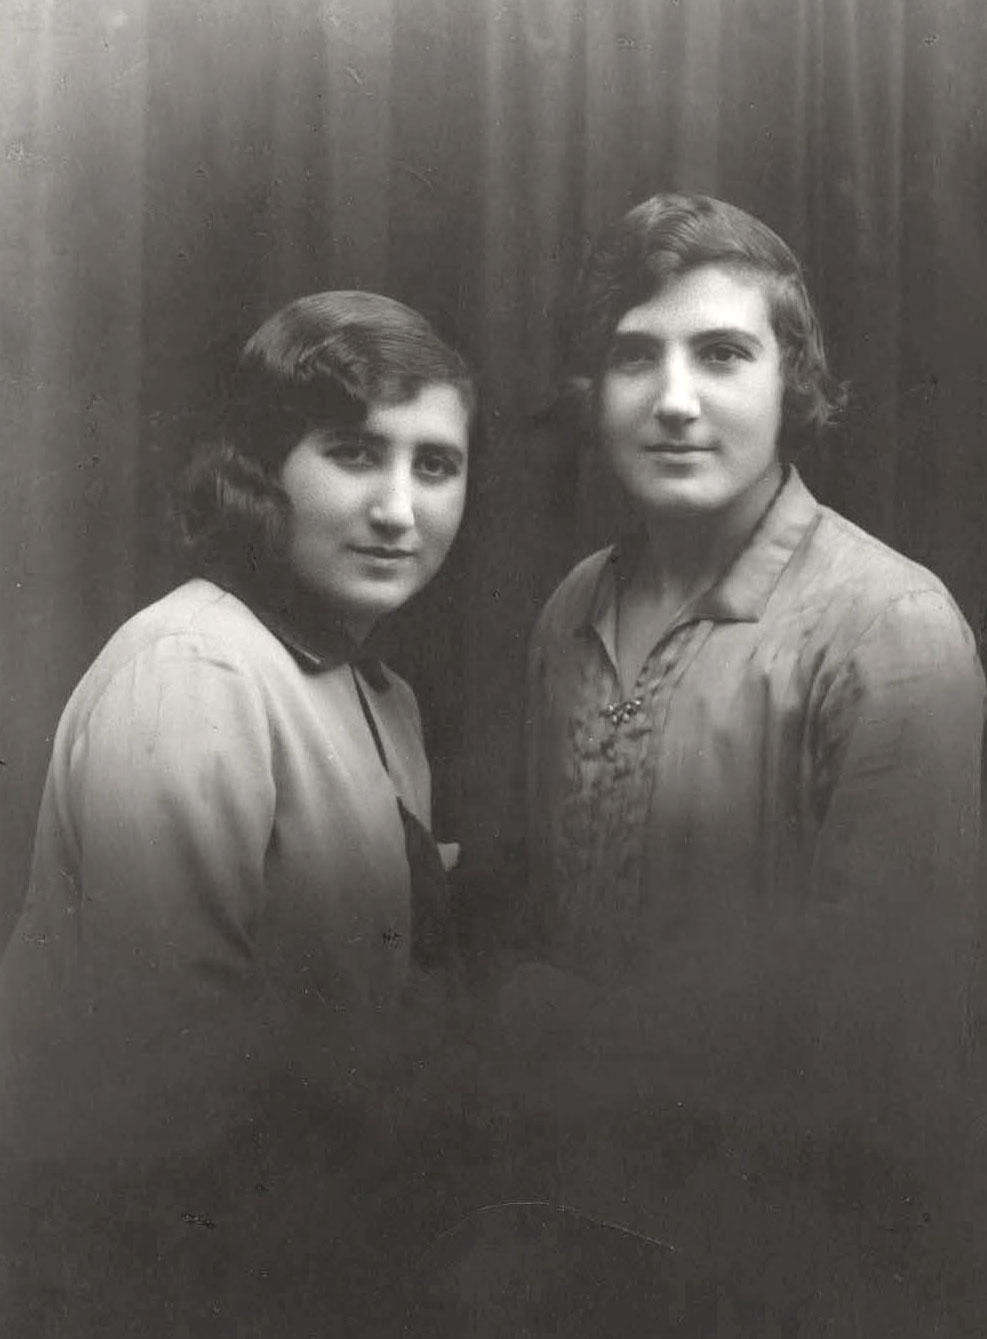 Sisters Sabina and Genya Kleinman from Plonsk in a photograph from before the war